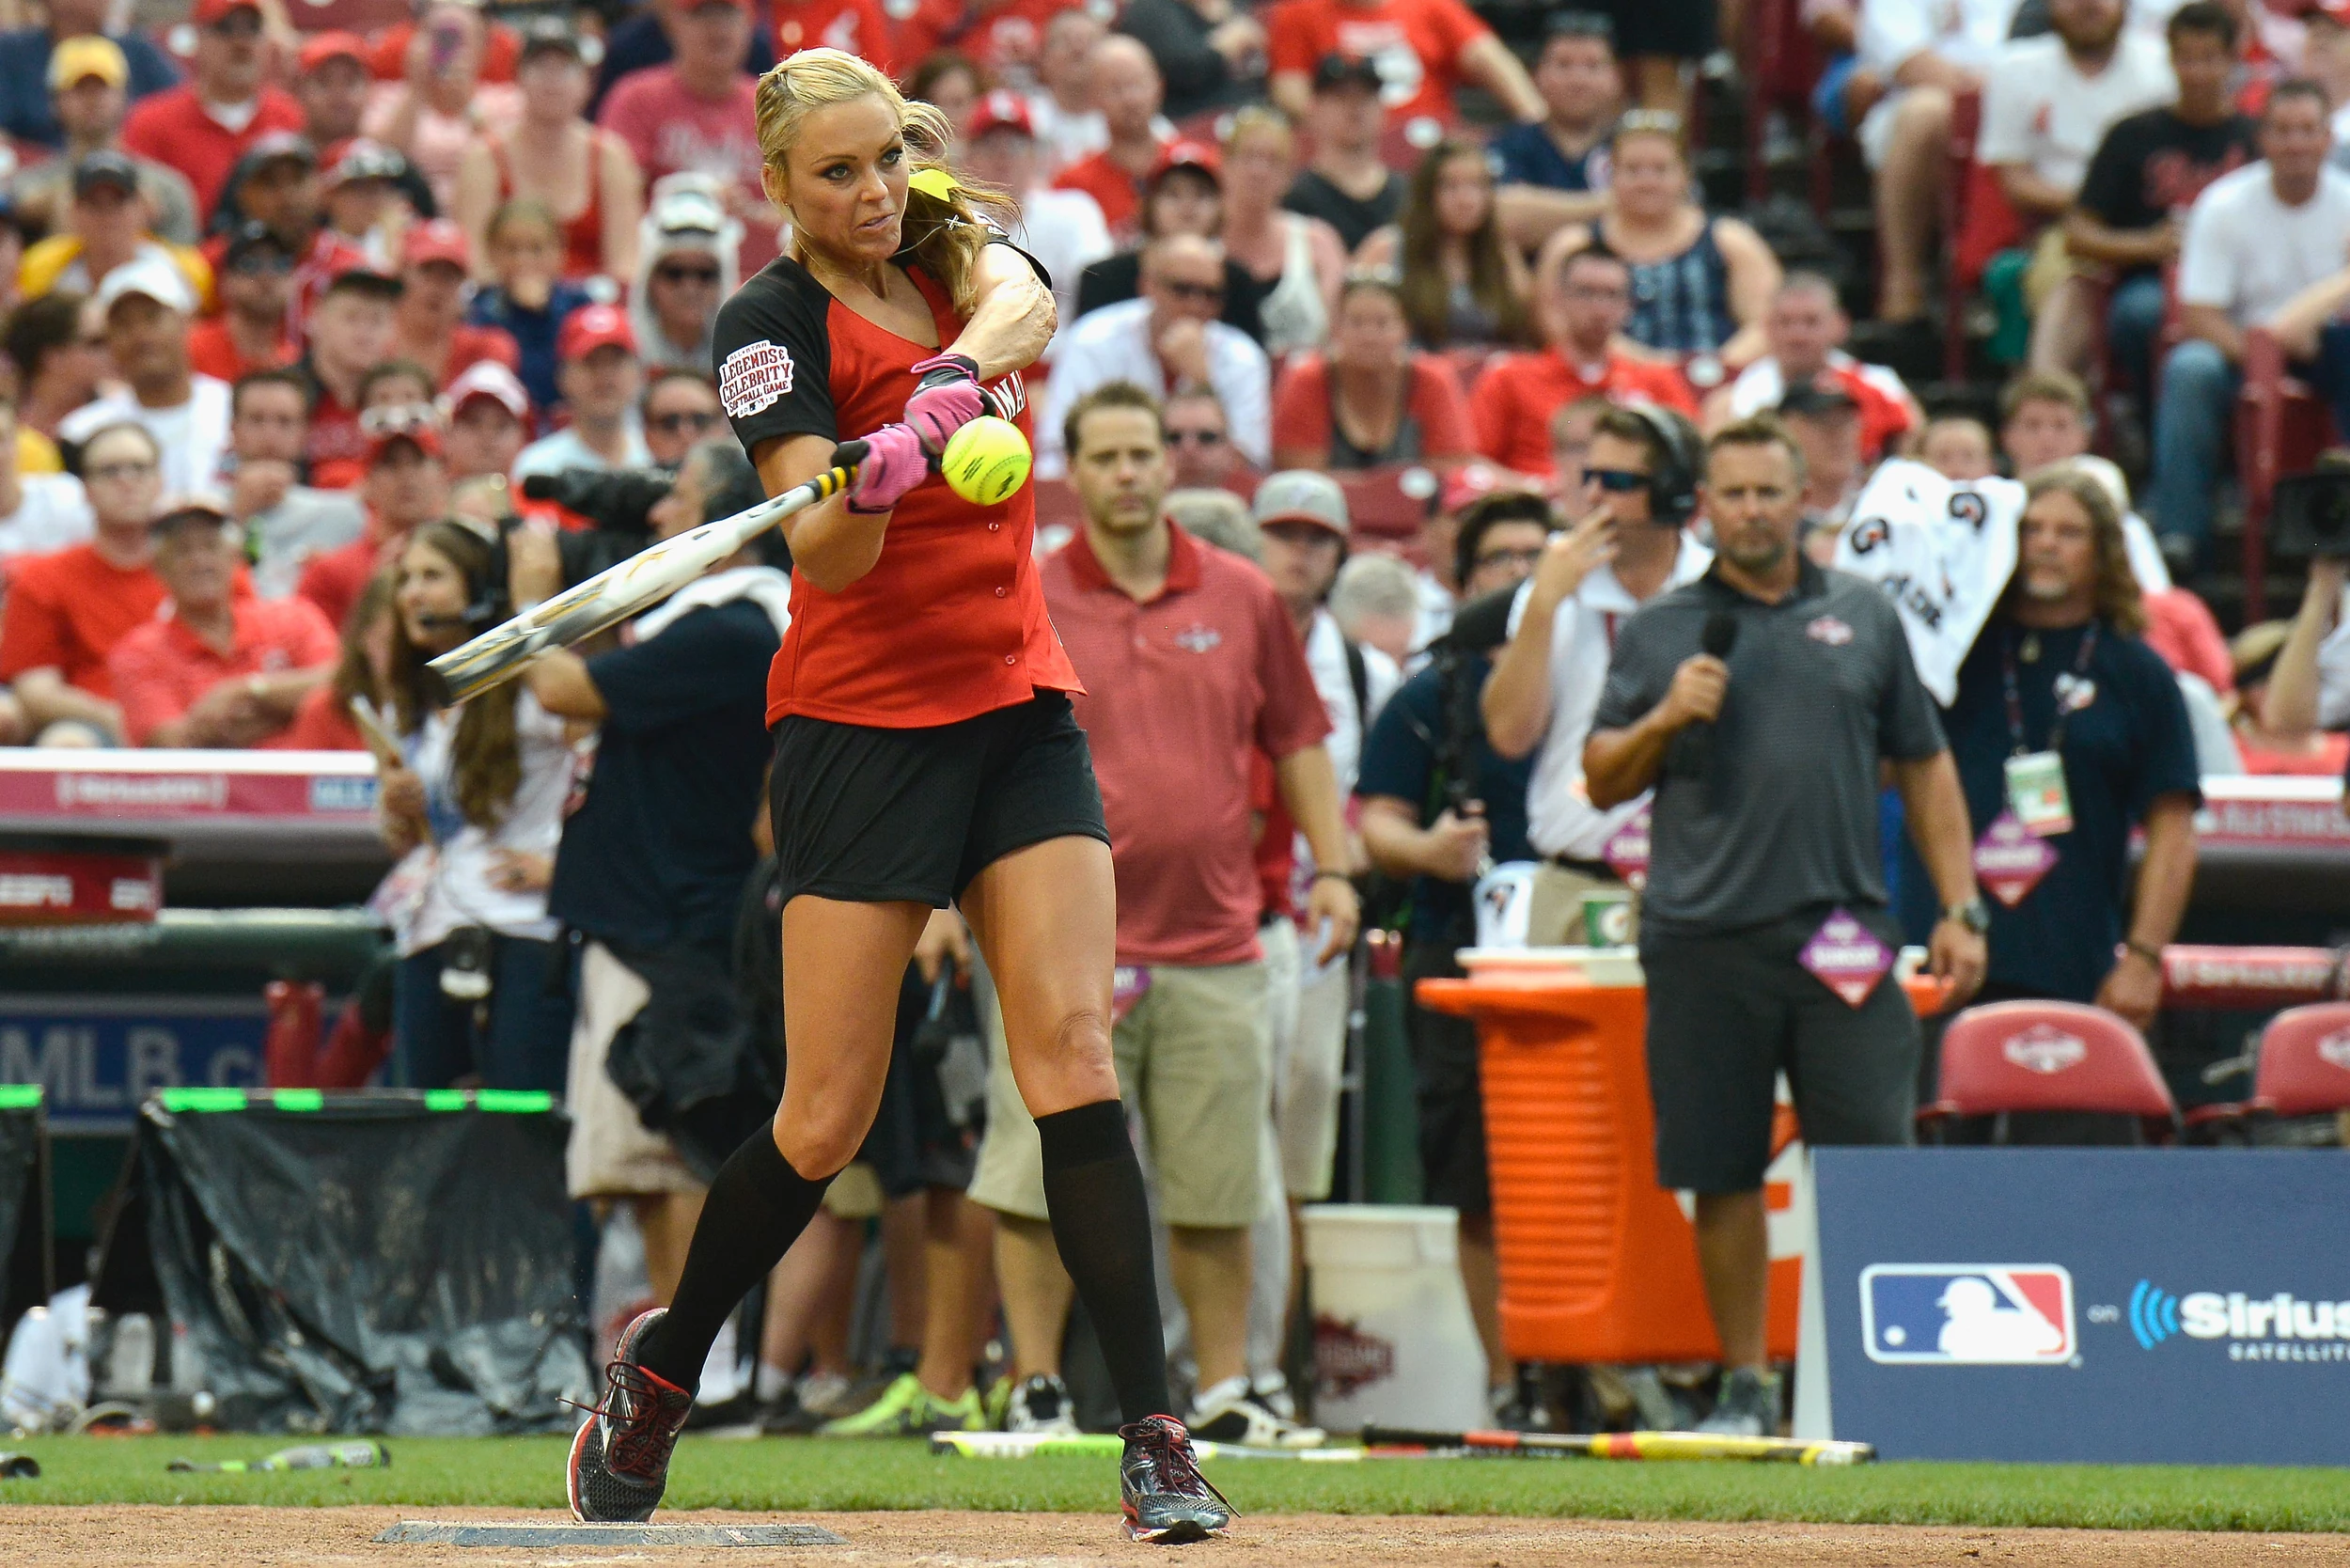 jennie finch contributions to society